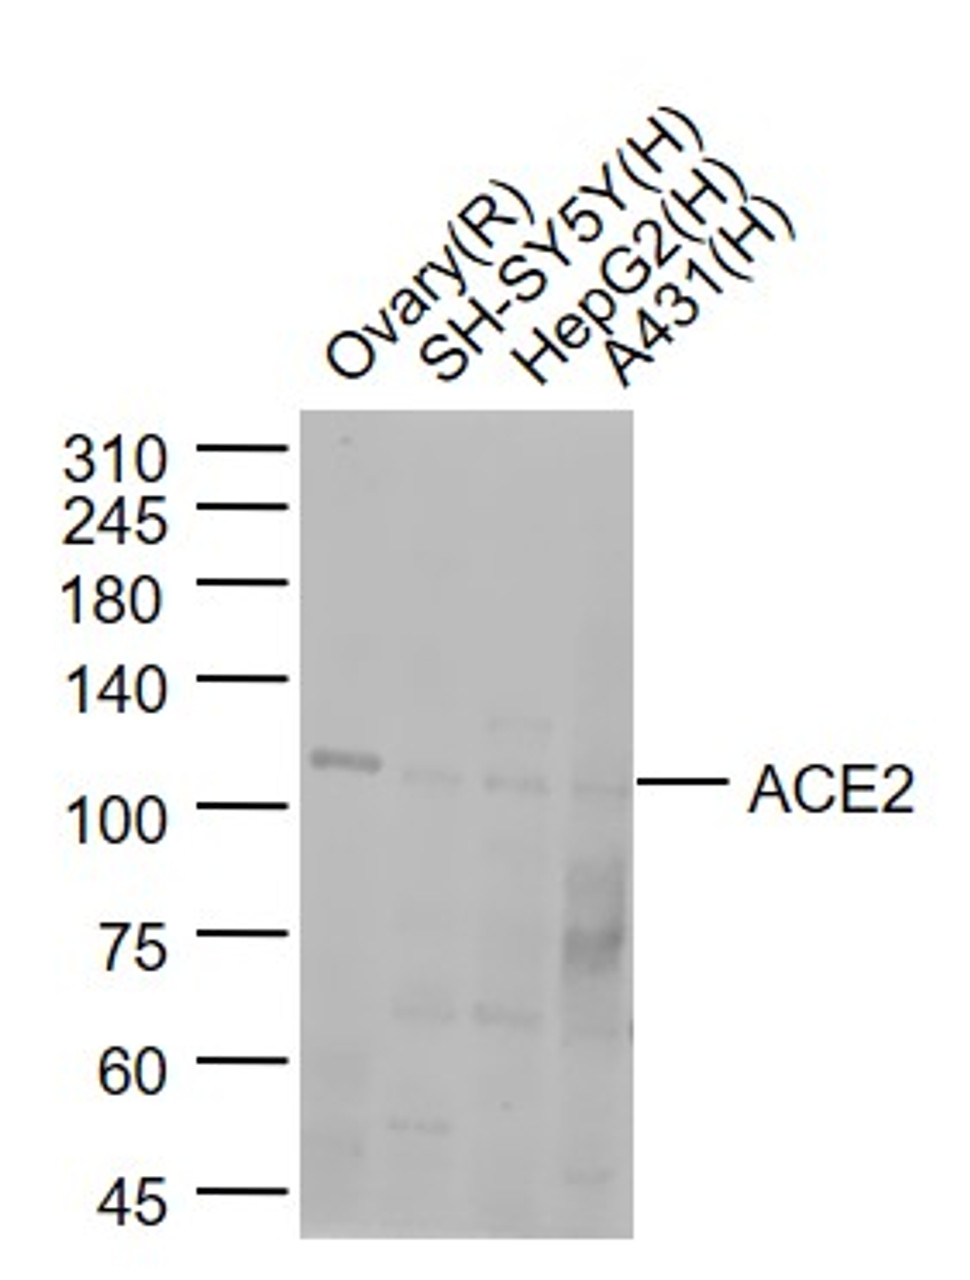 <strong>Figure 1 Western Blot Validation of ACE2</strong><br>
Lane 1: rat ovary lysates, Lane 2: SH-SY5Y cell lysates, Lane 3: HepG2 cell lysates, Lane 4: A431 cell lysates probed with ACE2 antibody, 10-600, at 1:1000 dilution and 4˚C overnight incubation. Followed by conjugated secondary antibody incubation at 1:20000 for 60 min at 37˚C.